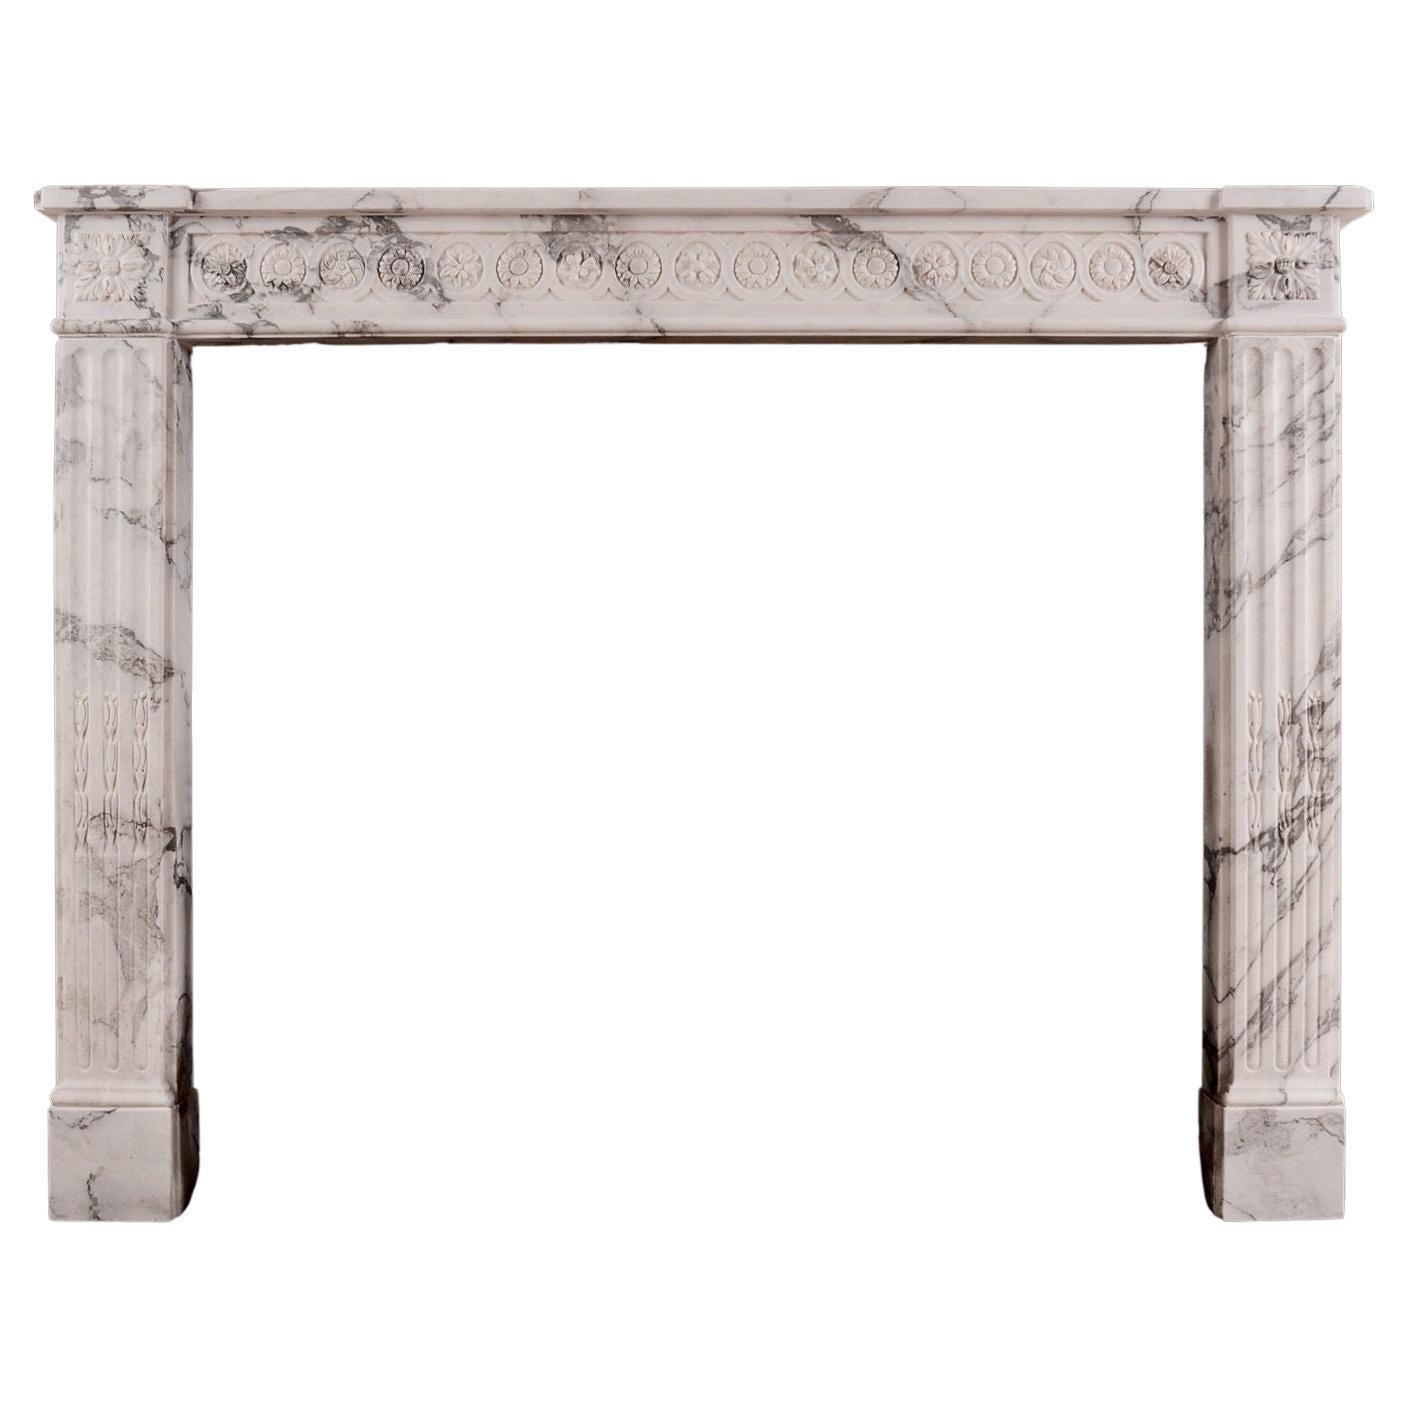 An Italian Arabescato French Louis XVI Marble Fireplace